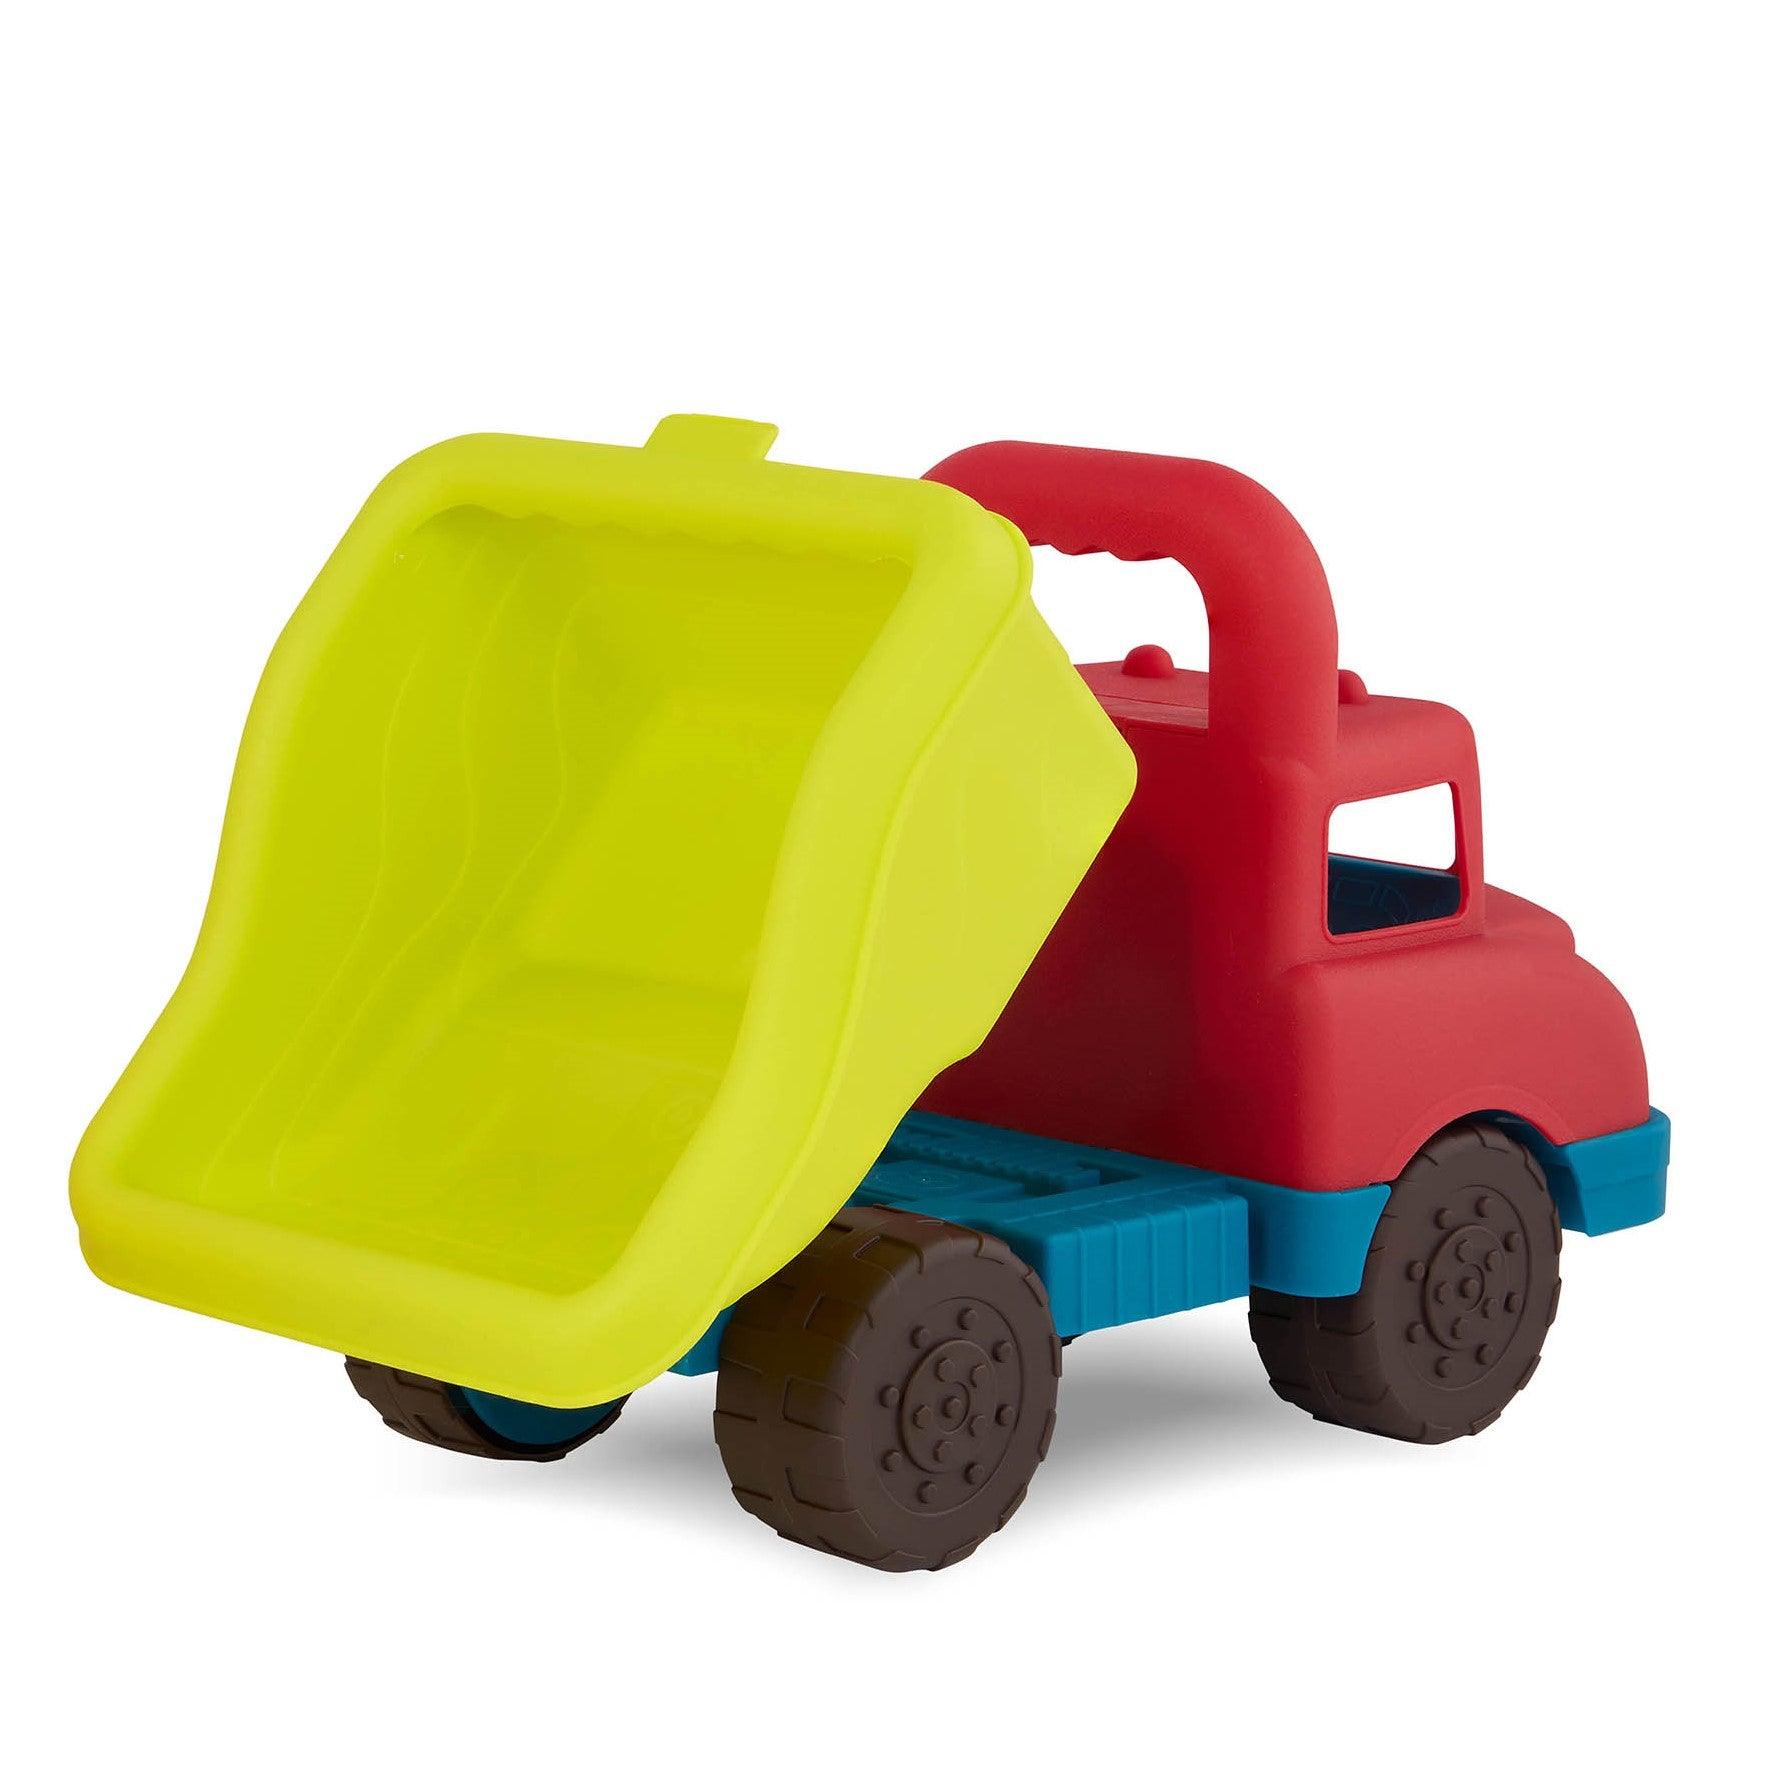 B.Toys: Tipper truck with Grab-n-Go Truck handle